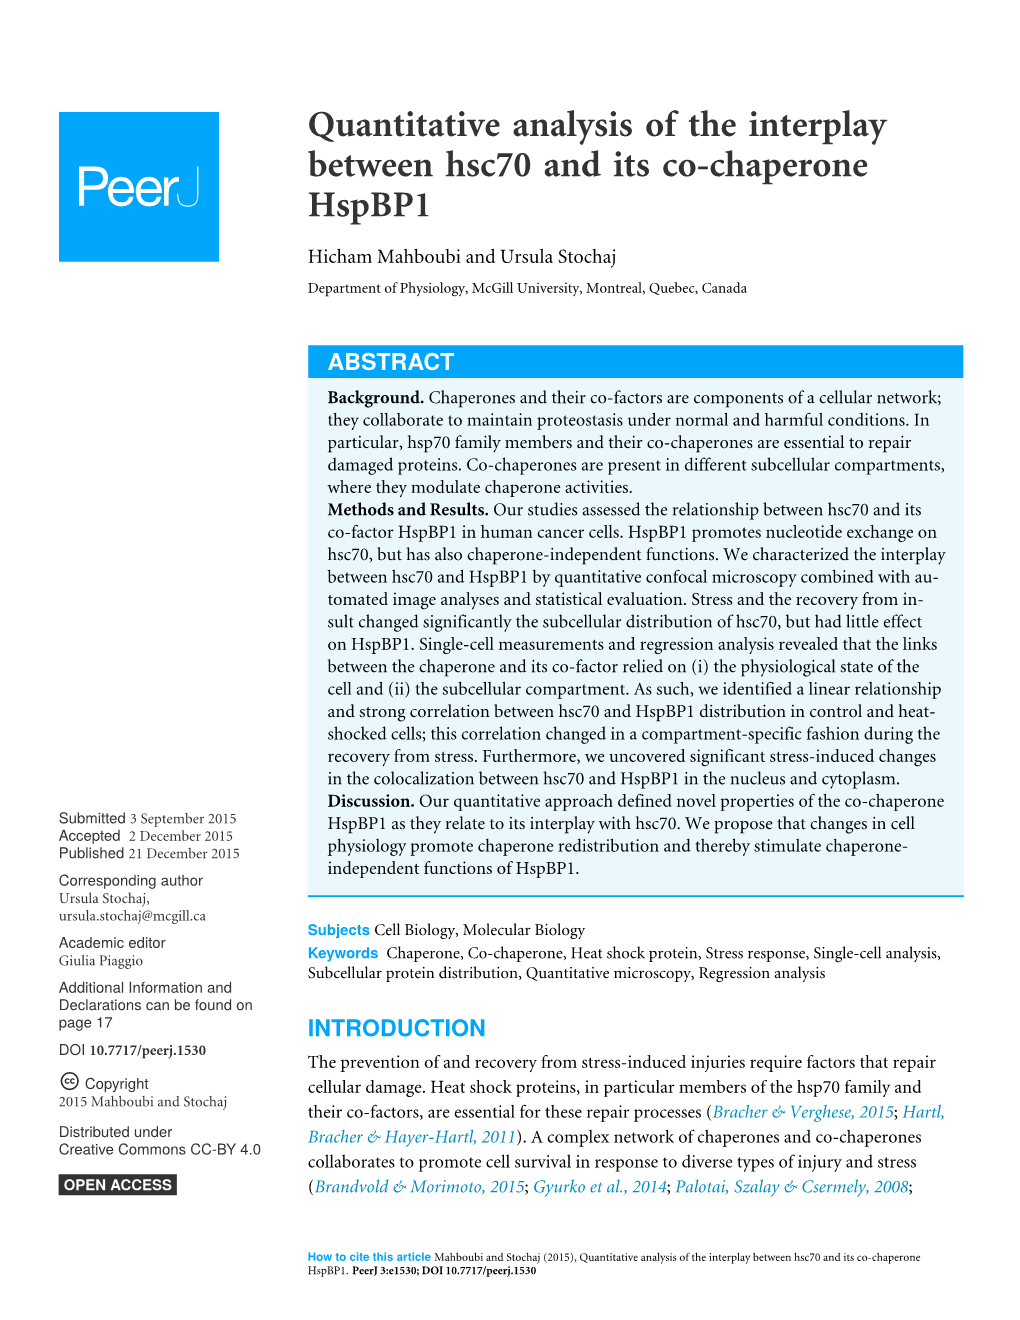 Quantitative Analysis of the Interplay Between Hsc70 and Its Co-Chaperone Hspbp1